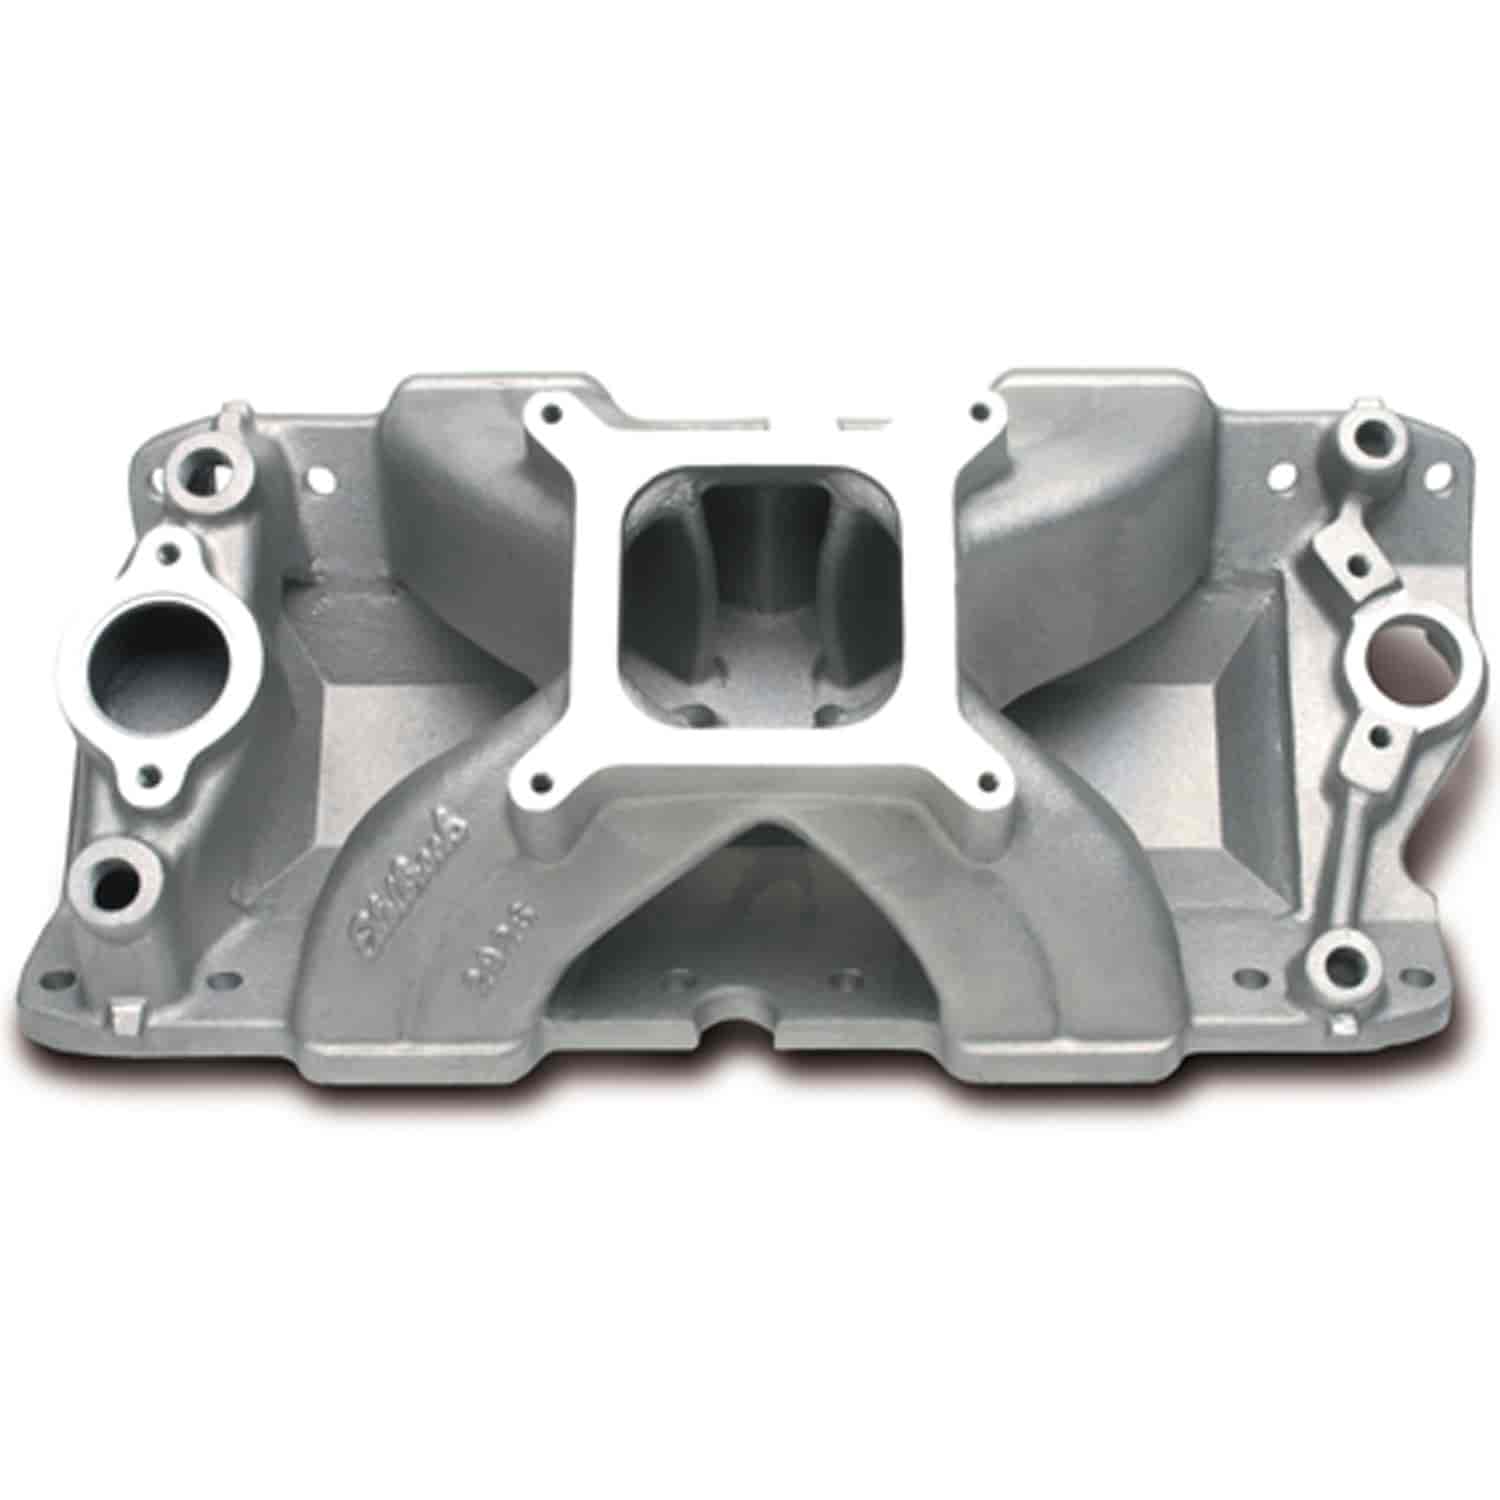 Super Victor "Heavy" Intake Manifold Same as 350-2926 Intake but Cast with Extra Material for Extensive Porting